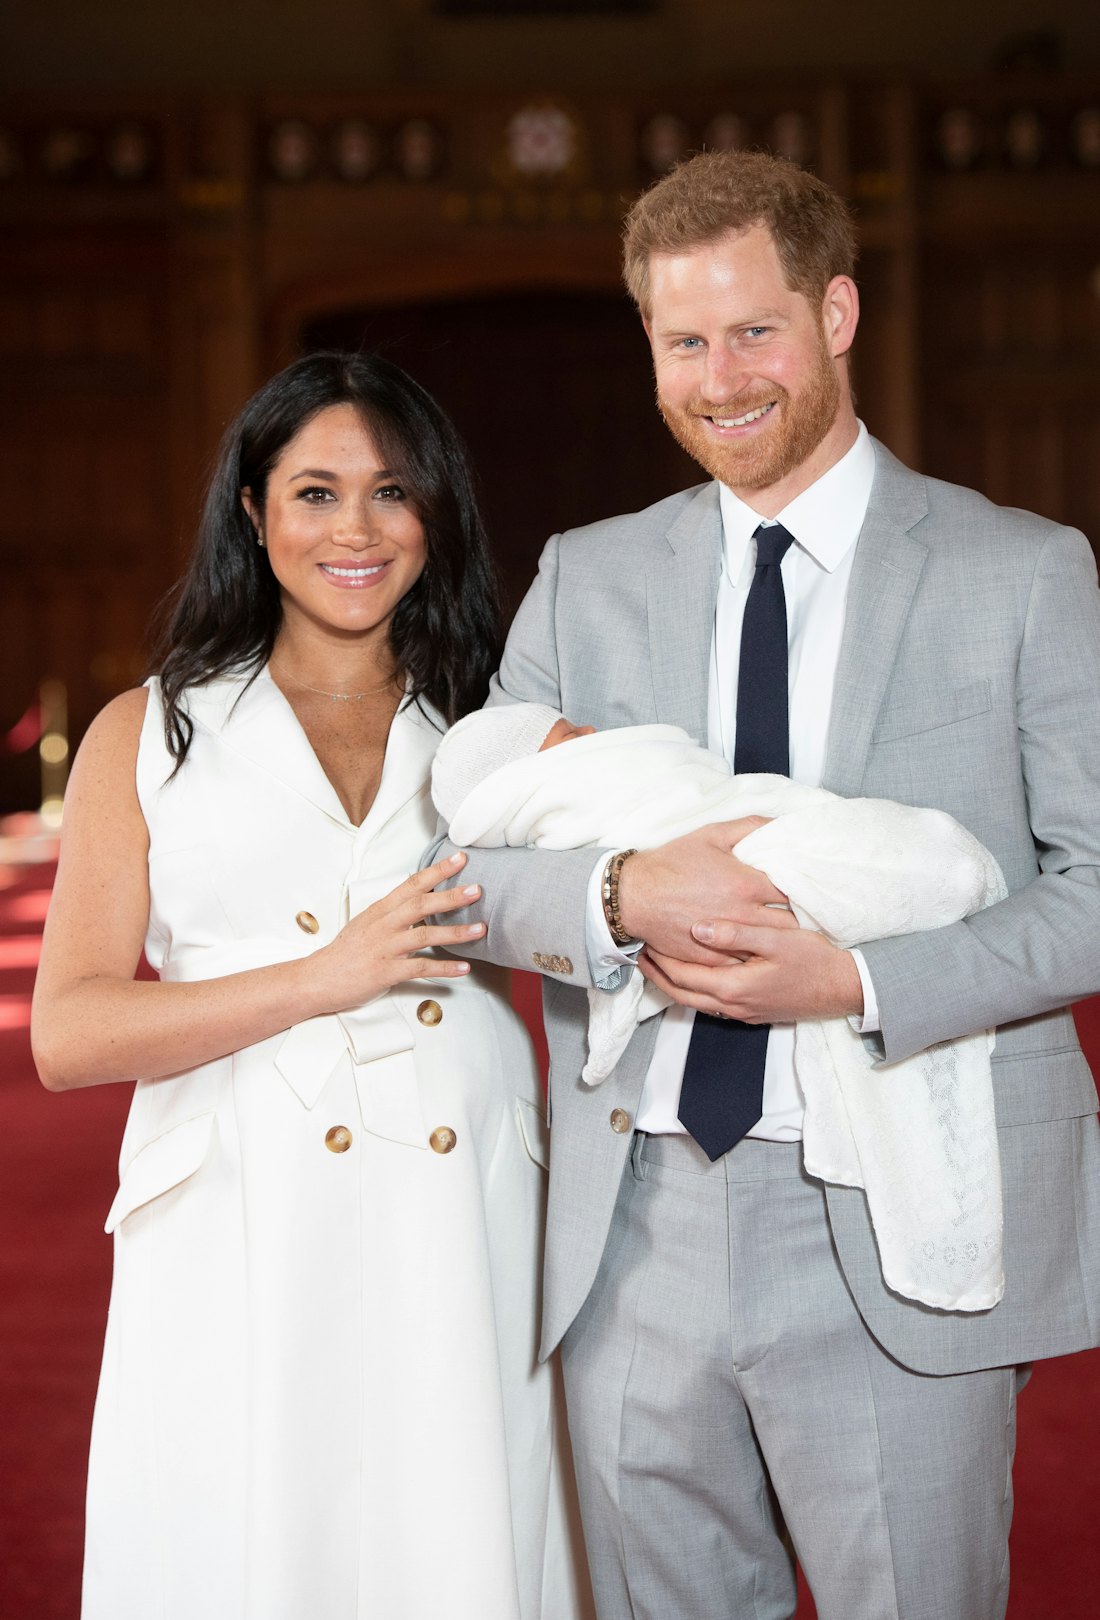 Prince Harry, Duke of Sussex and Meghan, Duchess of Sussex, pose with their newborn son Archie Harri...